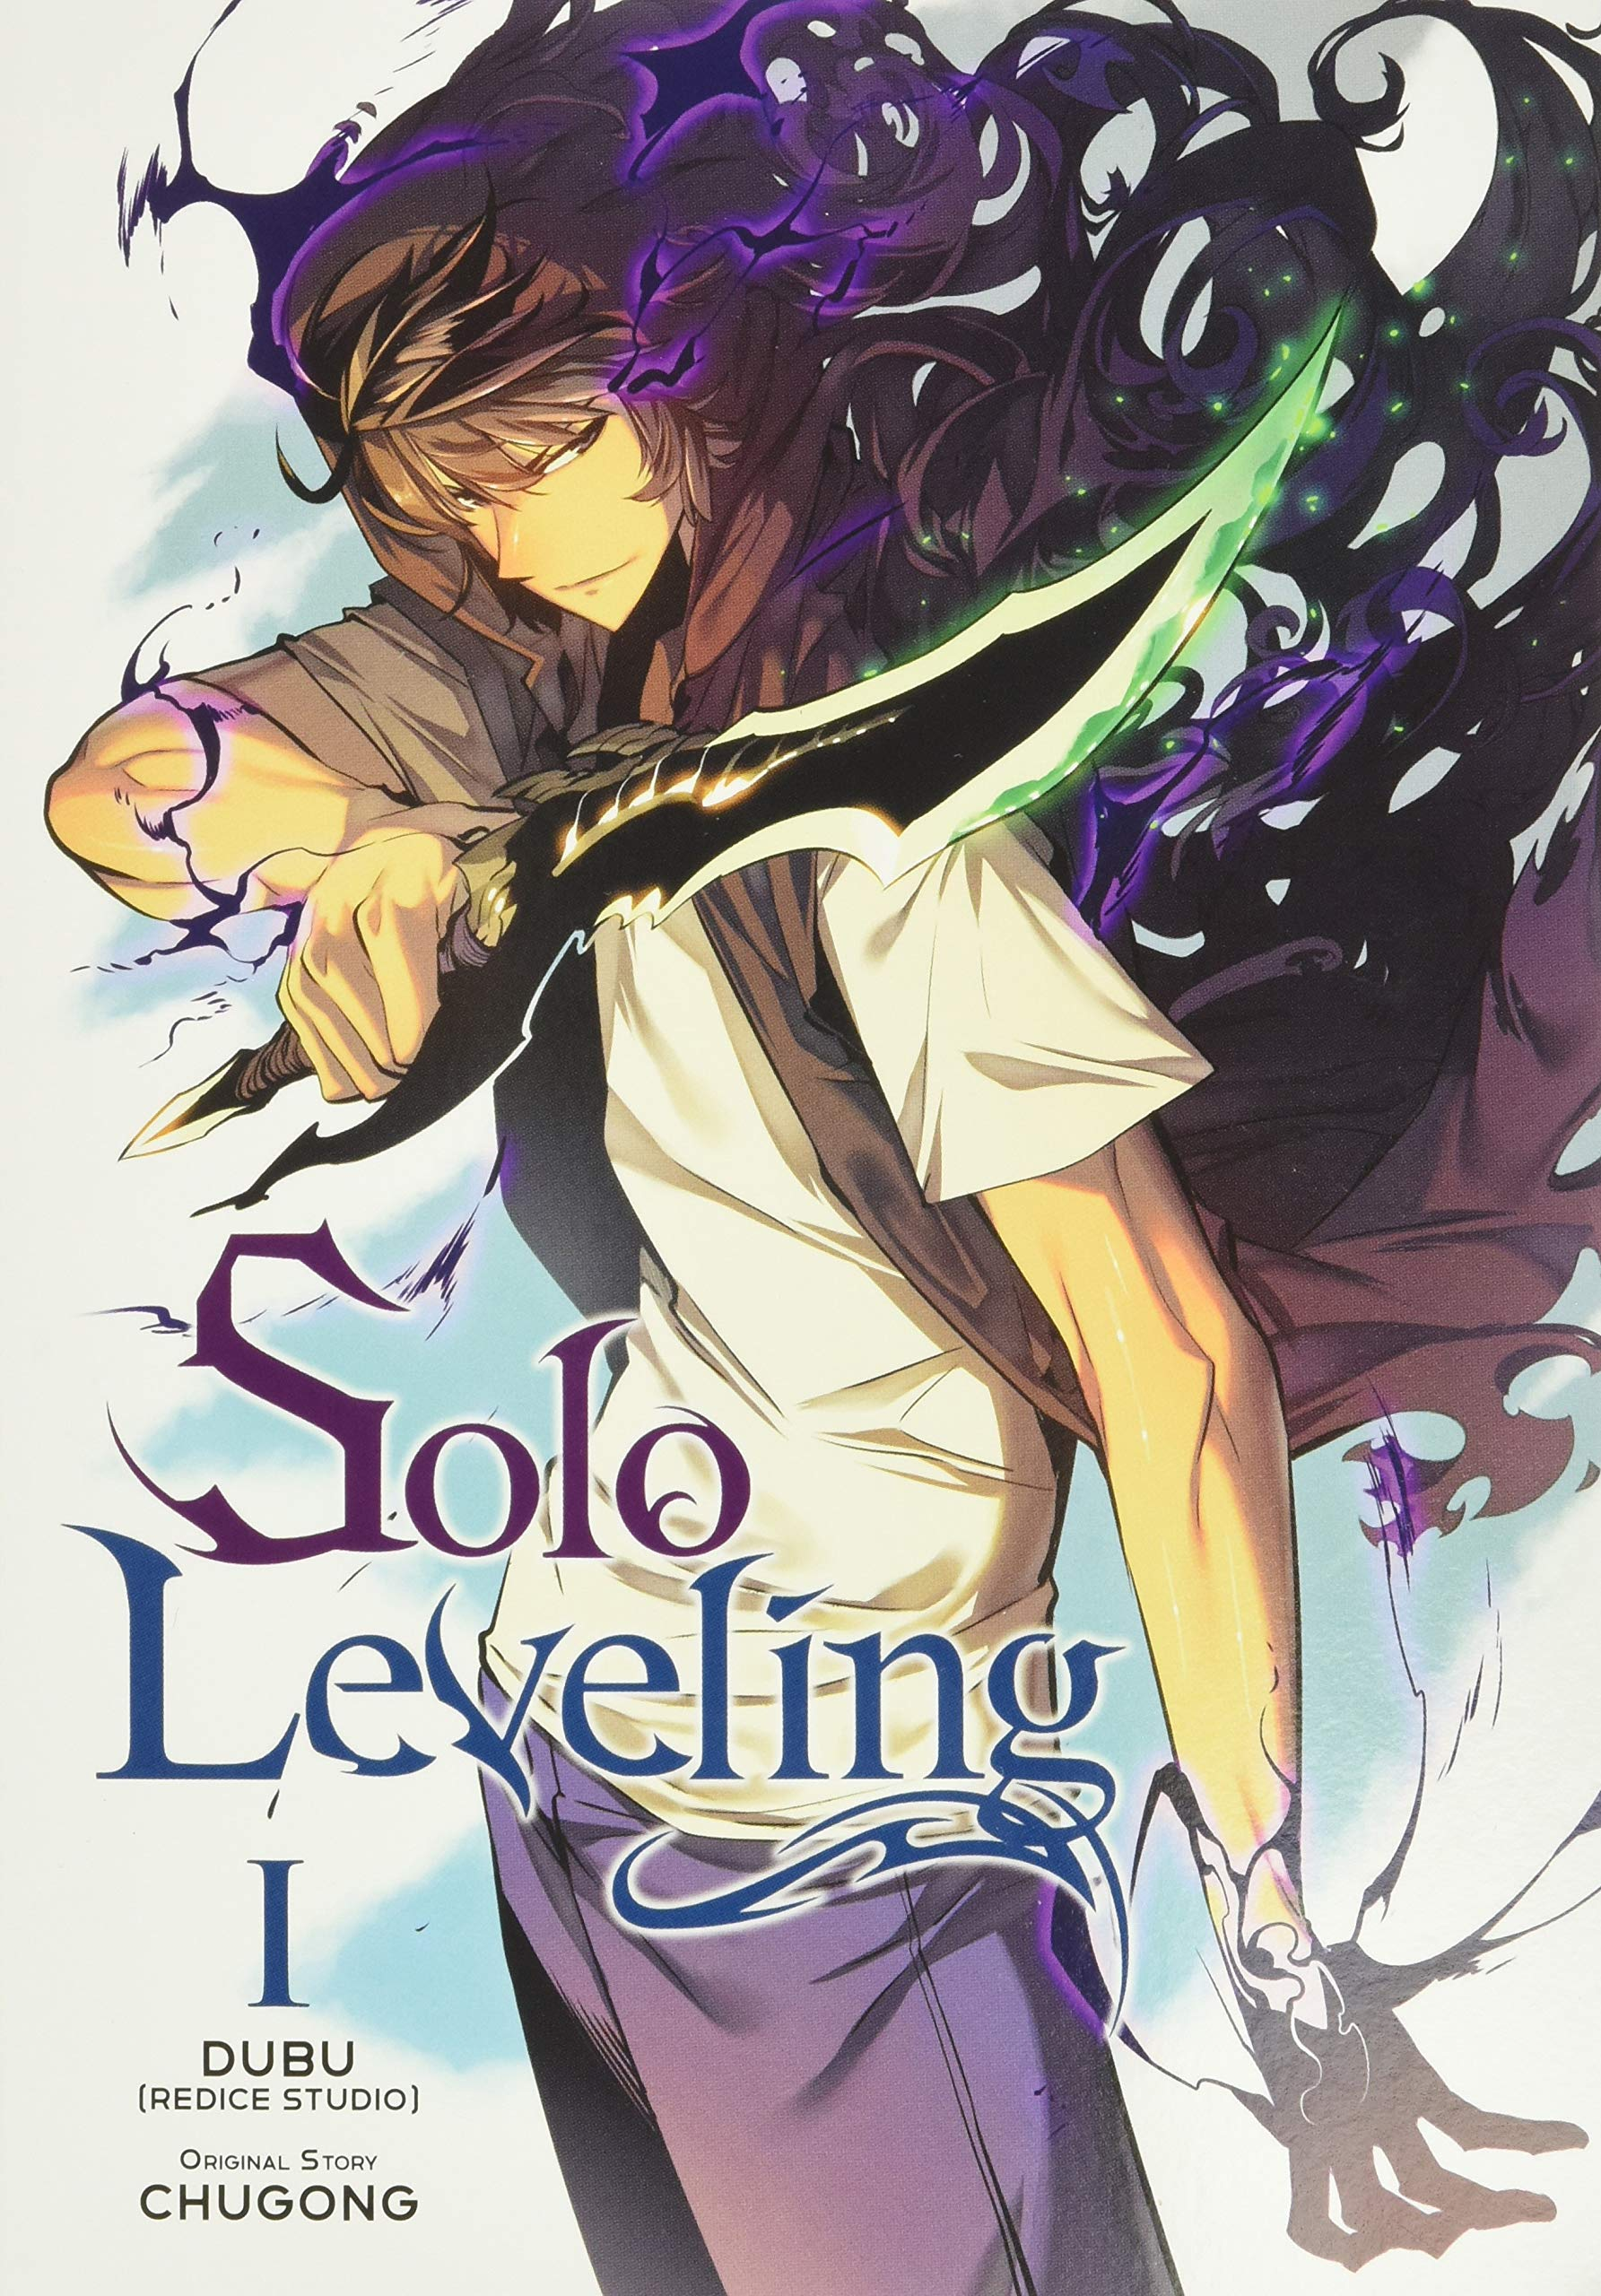 Solo Leveling Trailer: Anticipated Anime Adaptation Coming to Crunchyroll